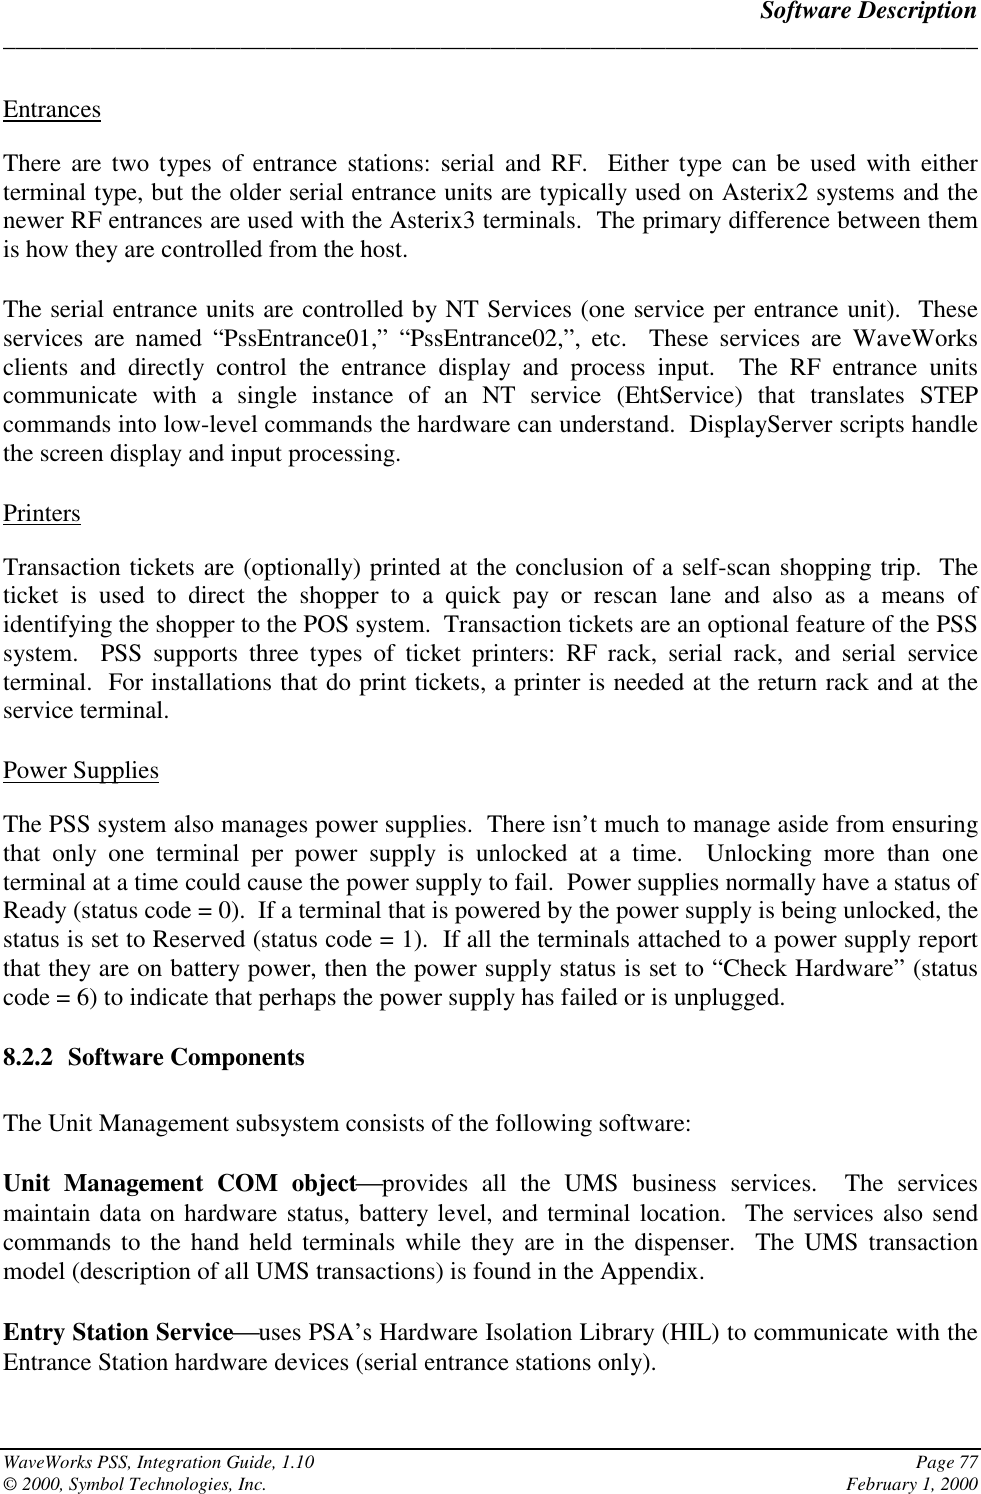 Software Description______________________________________________________________________________WaveWorks PSS, Integration Guide, 1.10 Page 77© 2000, Symbol Technologies, Inc. February 1, 2000EntrancesThere are two types of entrance stations: serial and RF.  Either type can be used with eitherterminal type, but the older serial entrance units are typically used on Asterix2 systems and thenewer RF entrances are used with the Asterix3 terminals.  The primary difference between themis how they are controlled from the host.The serial entrance units are controlled by NT Services (one service per entrance unit).  Theseservices are named “PssEntrance01,” “PssEntrance02,”, etc.  These services are WaveWorksclients and directly control the entrance display and process input.  The RF entrance unitscommunicate with a single instance of an NT service (EhtService) that translates STEPcommands into low-level commands the hardware can understand.  DisplayServer scripts handlethe screen display and input processing.PrintersTransaction tickets are (optionally) printed at the conclusion of a self-scan shopping trip.  Theticket is used to direct the shopper to a quick pay or rescan lane and also as a means ofidentifying the shopper to the POS system.  Transaction tickets are an optional feature of the PSSsystem.  PSS supports three types of ticket printers: RF rack, serial rack, and serial serviceterminal.  For installations that do print tickets, a printer is needed at the return rack and at theservice terminal.Power SuppliesThe PSS system also manages power supplies.  There isn’t much to manage aside from ensuringthat only one terminal per power supply is unlocked at a time.  Unlocking more than oneterminal at a time could cause the power supply to fail.  Power supplies normally have a status ofReady (status code = 0).  If a terminal that is powered by the power supply is being unlocked, thestatus is set to Reserved (status code = 1).  If all the terminals attached to a power supply reportthat they are on battery power, then the power supply status is set to “Check Hardware” (statuscode = 6) to indicate that perhaps the power supply has failed or is unplugged.8.2.2 Software ComponentsThe Unit Management subsystem consists of the following software:Unit Management COM objectprovides all the UMS business services.  The servicesmaintain data on hardware status, battery level, and terminal location.  The services also sendcommands to the hand held terminals while they are in the dispenser.  The UMS transactionmodel (description of all UMS transactions) is found in the Appendix.Entry Station Serviceuses PSA’s Hardware Isolation Library (HIL) to communicate with theEntrance Station hardware devices (serial entrance stations only).